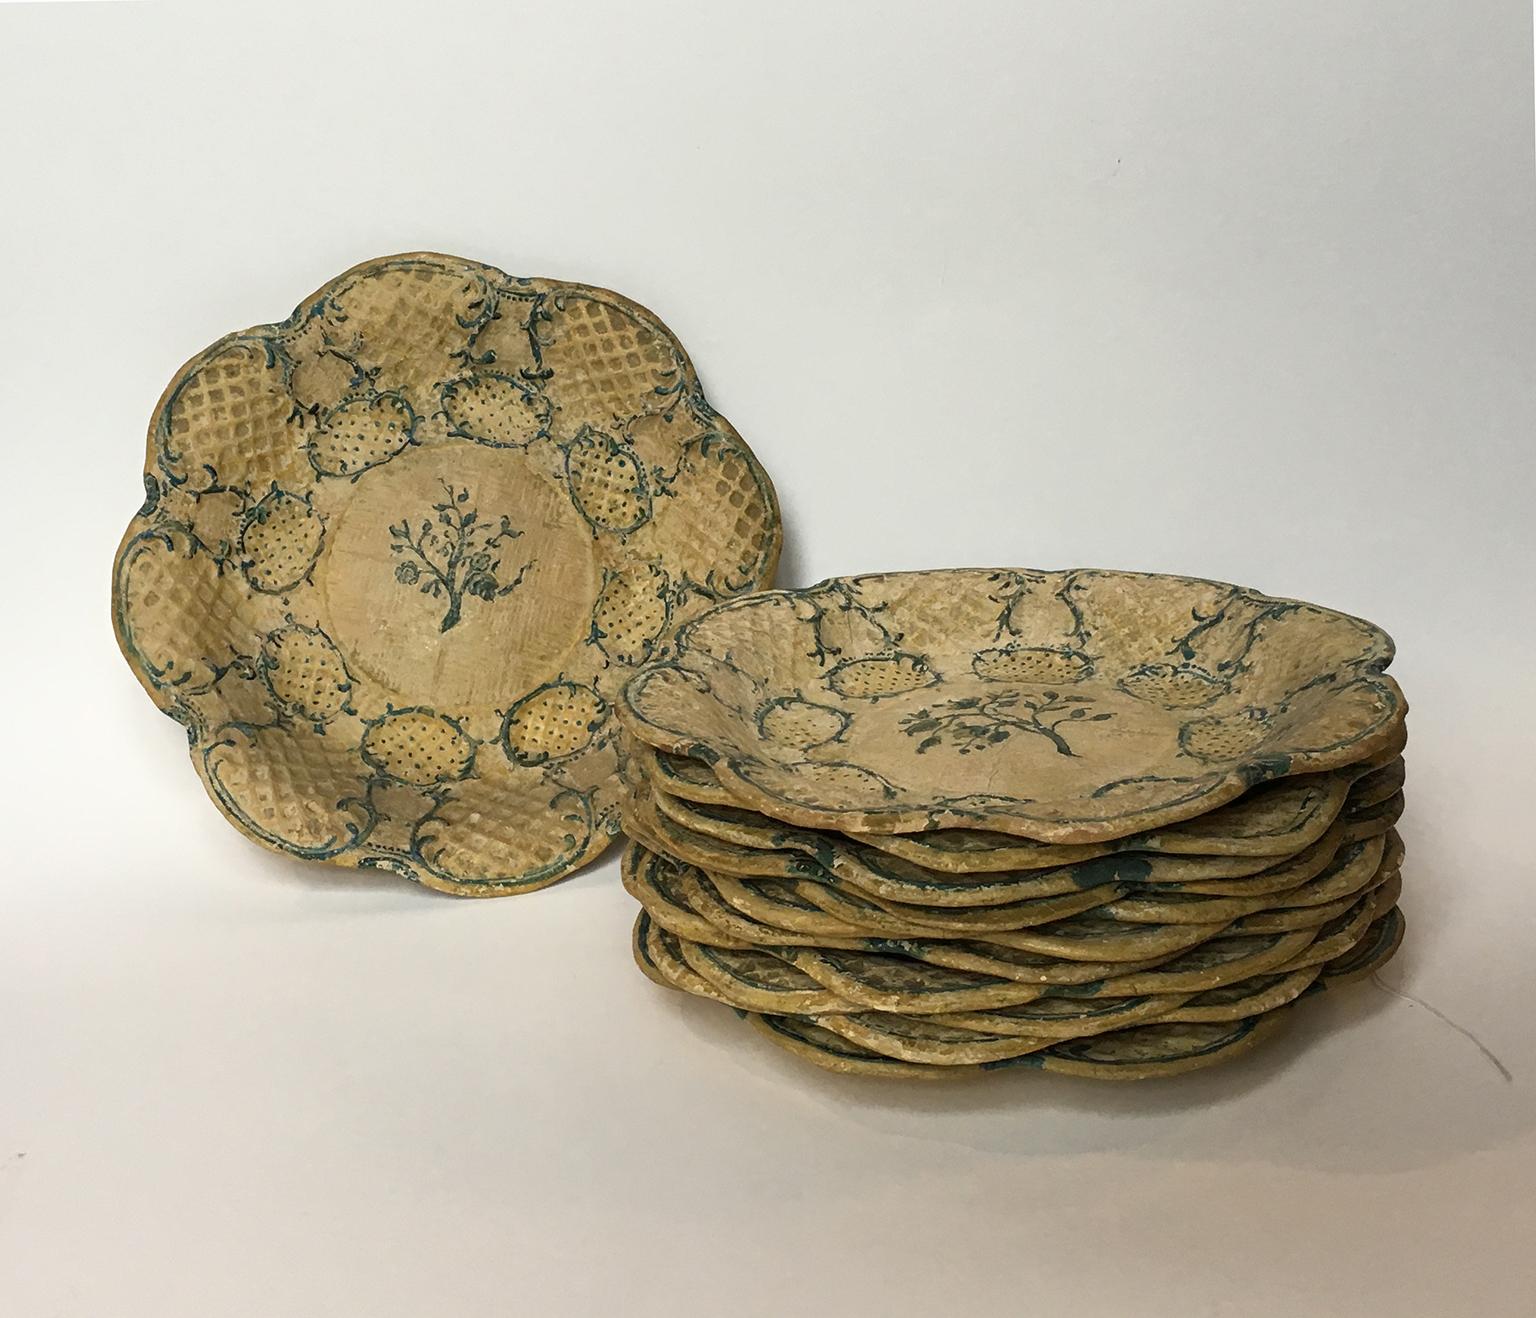 Twelve papier mâché dishes
Italy, last quarter of the 18th century

Each measures 9.05 in (23 cm) in diameter.
The twelve dishes weigh 1.94 lb (882 g)
Slight abrasions from use.

The art of papier-mâché is considered an artistic expression of